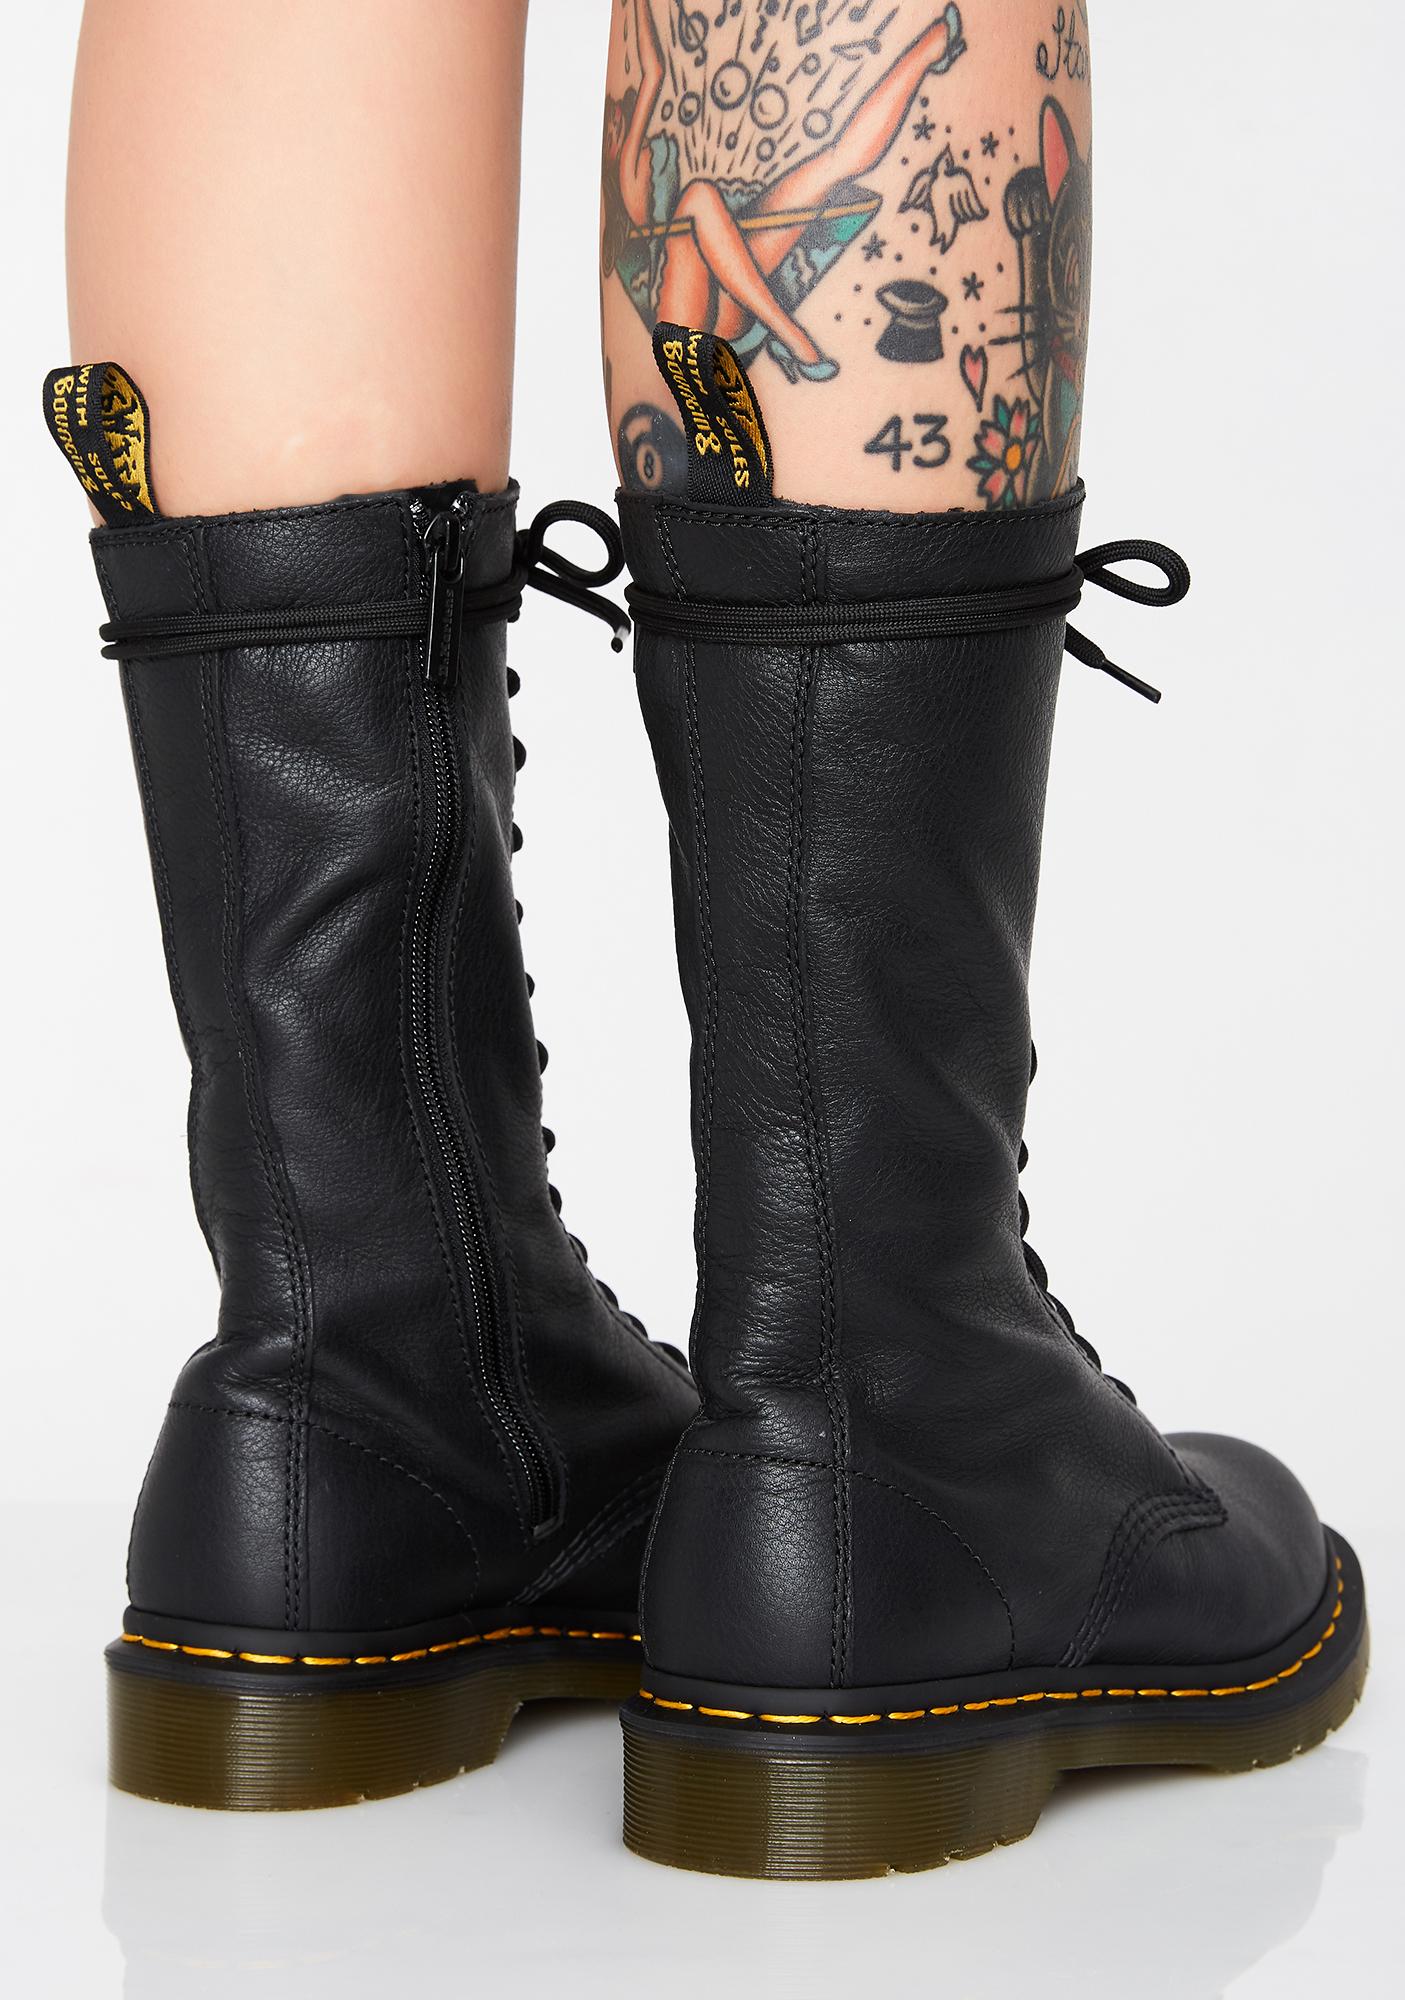 doc martens 14 eye boot laces Dr 